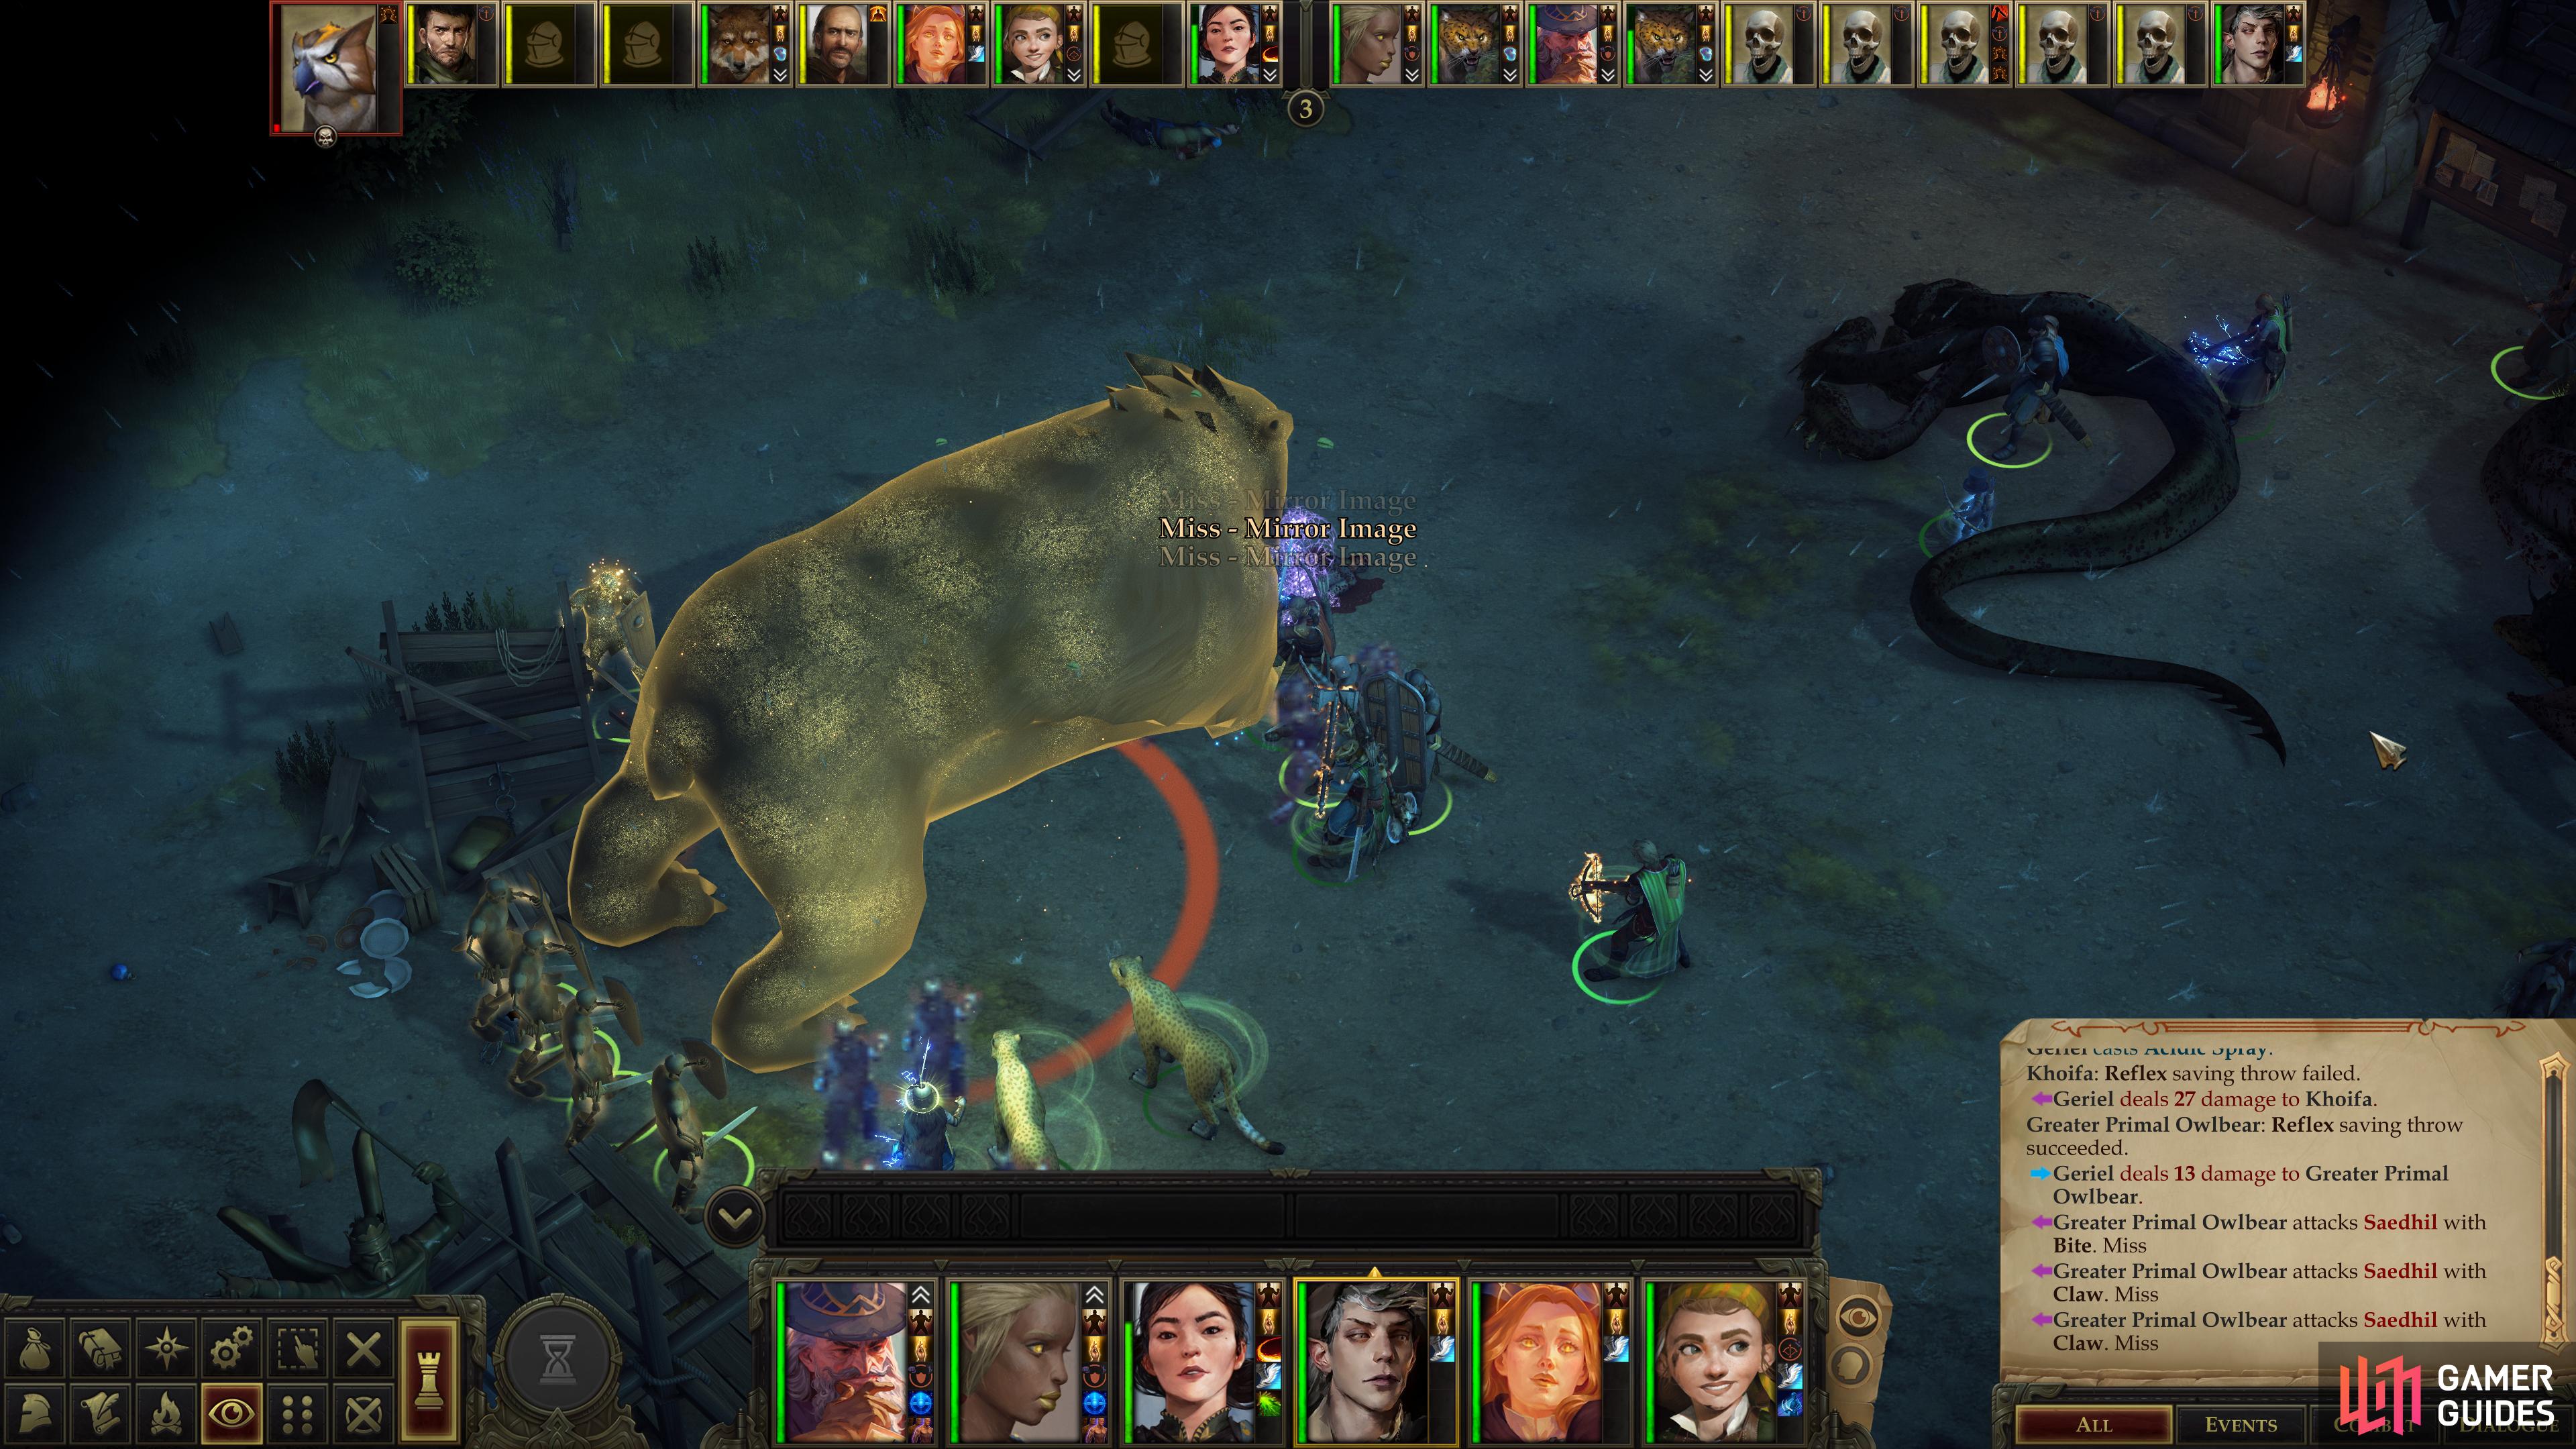 The massive owlbear's attacks are potent enough to challenge all but the most well-protected of tanks.